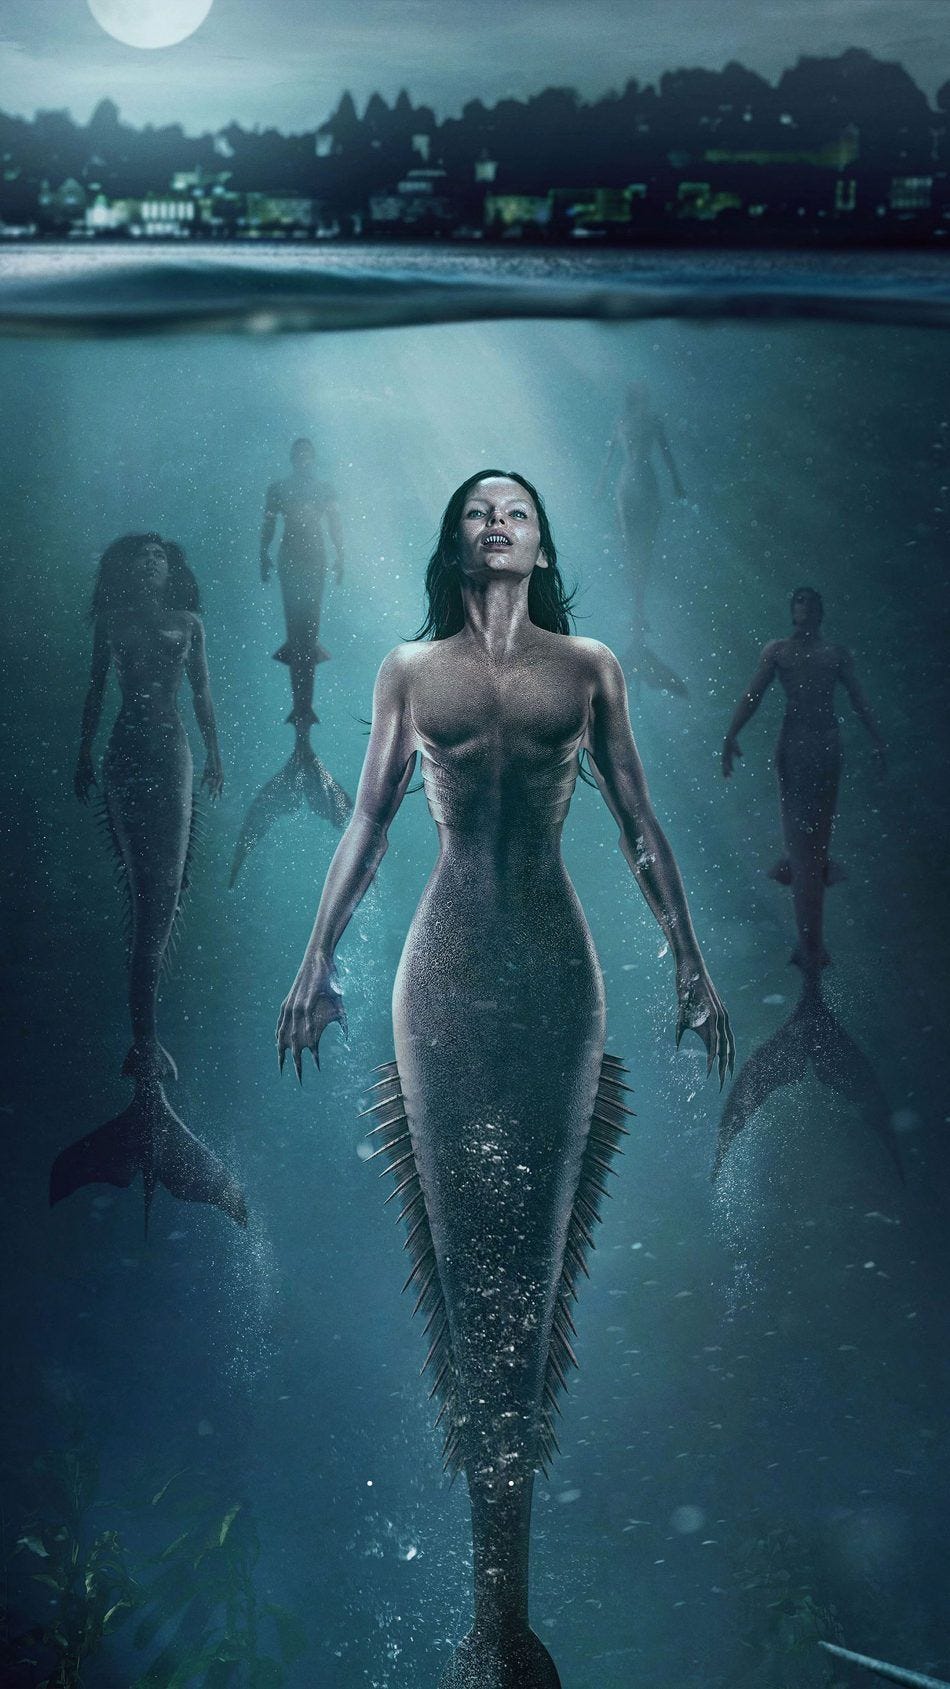 Mermaids could go from myth to reality